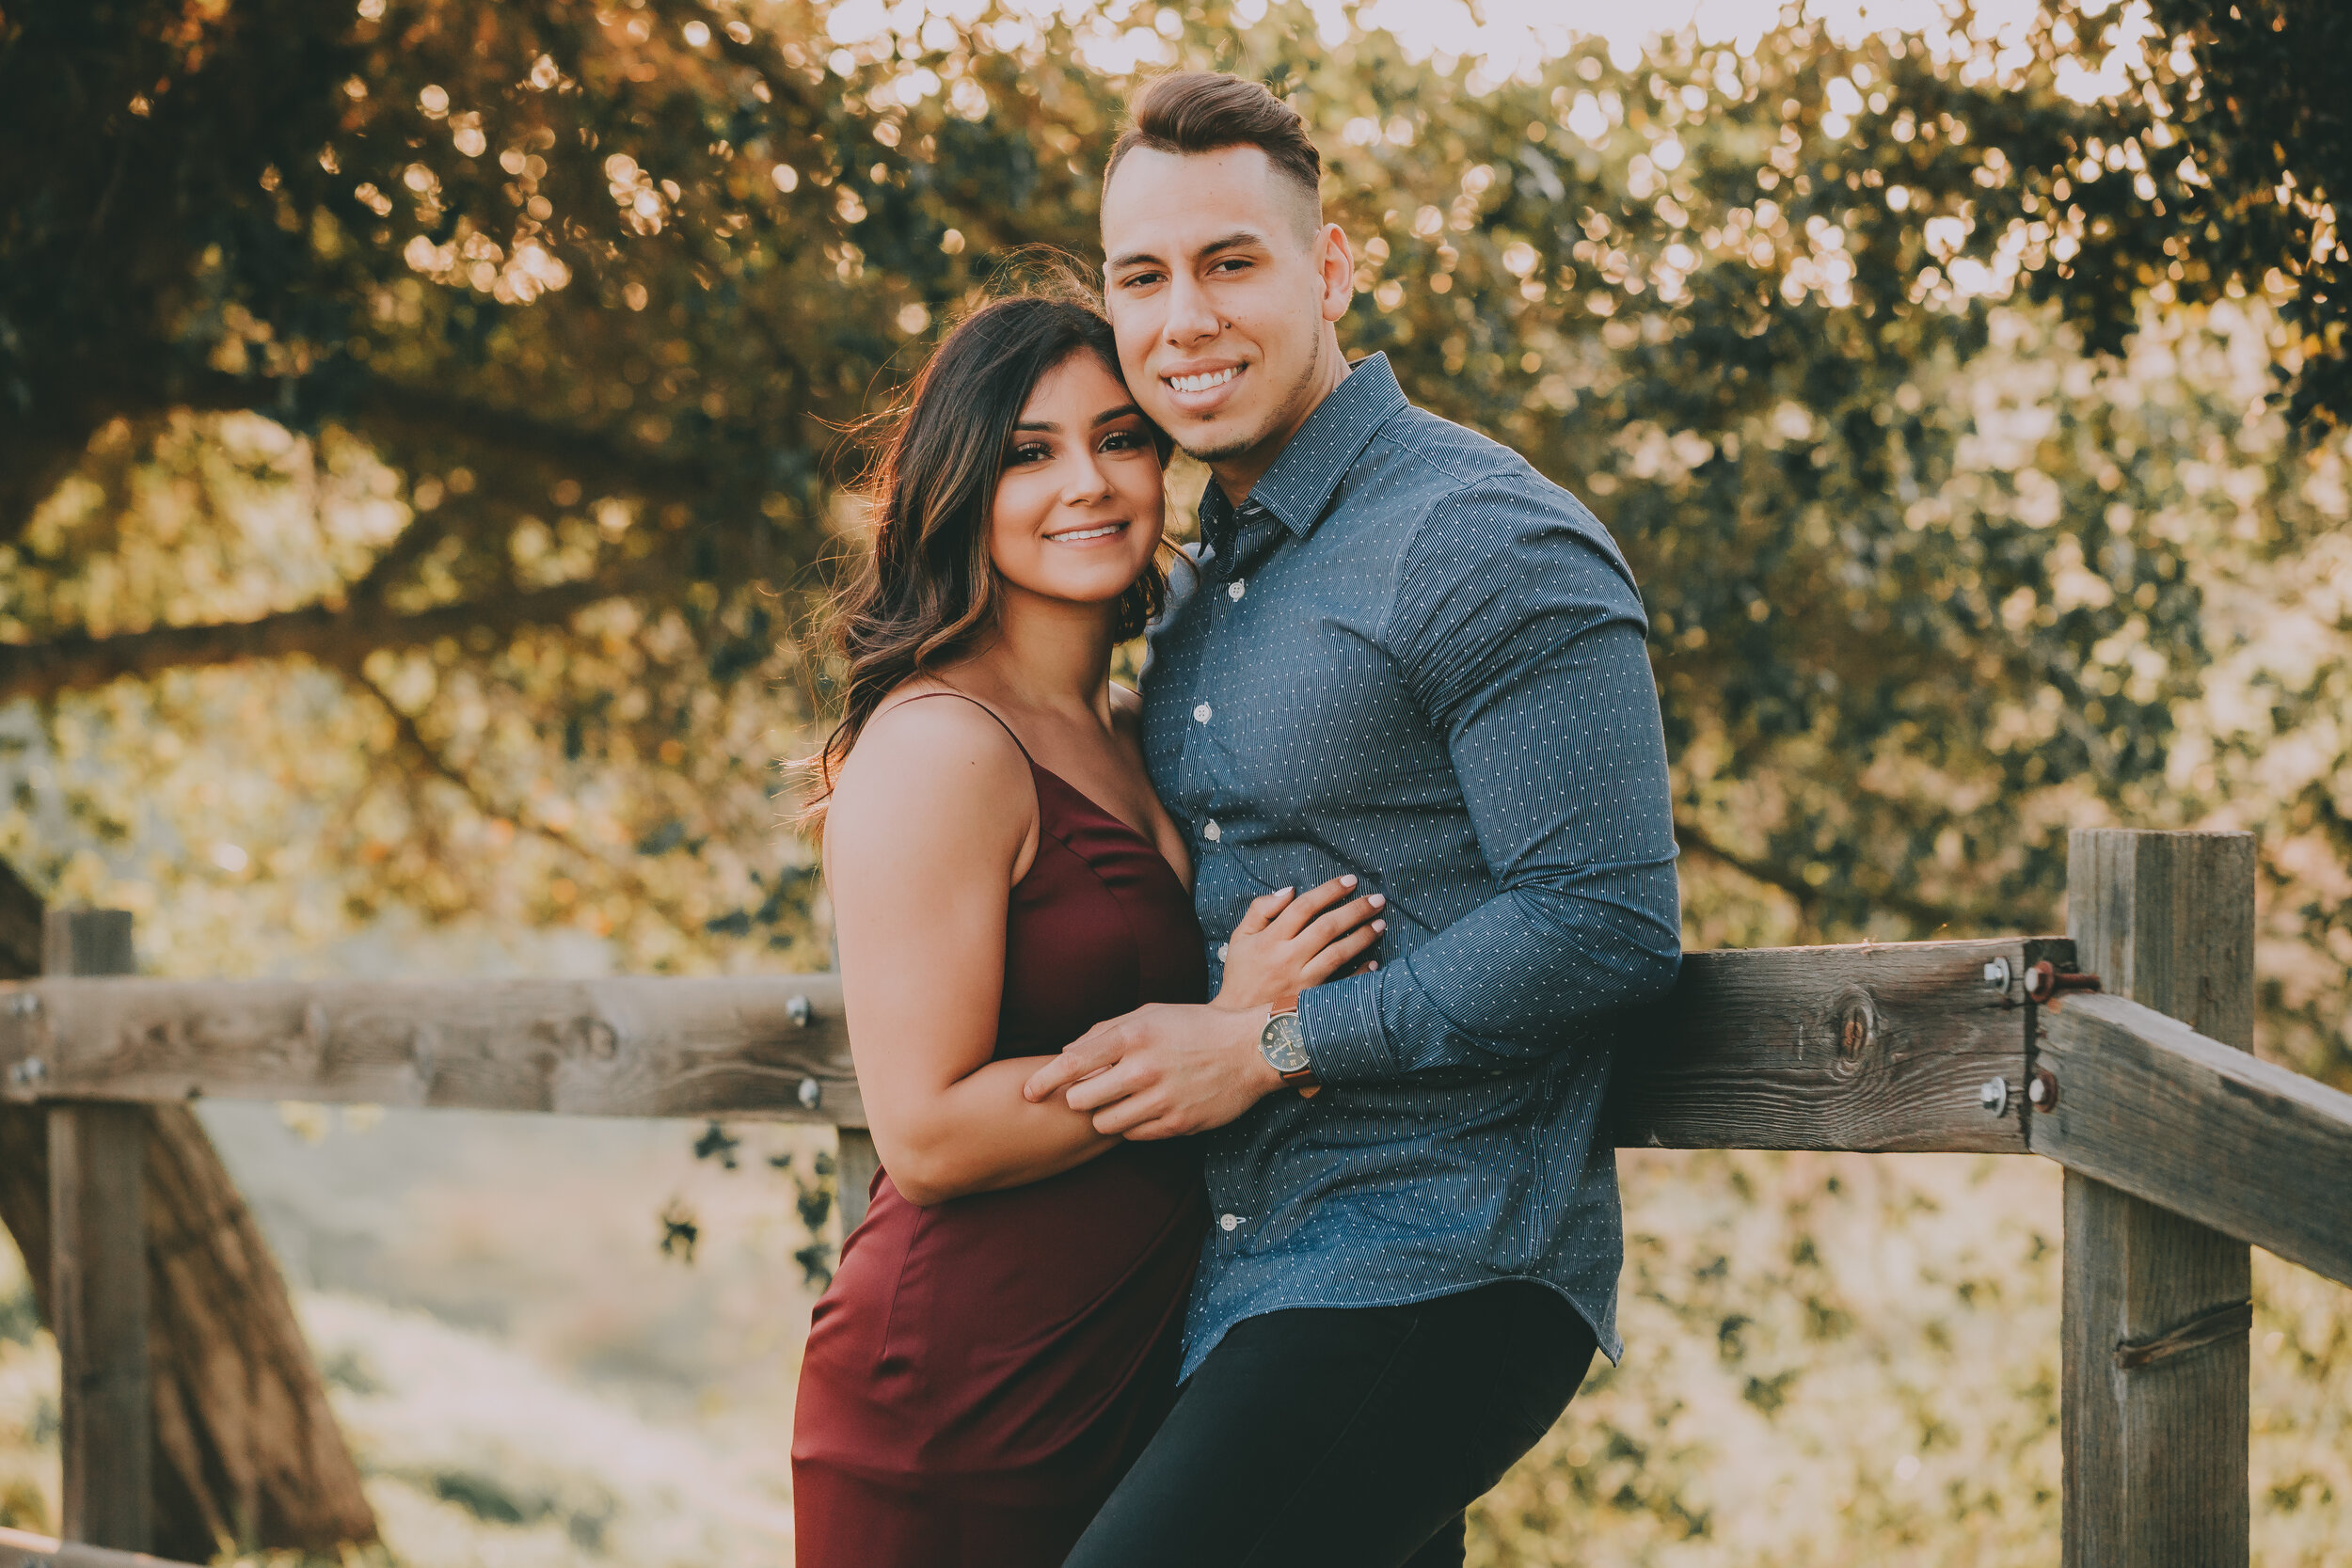 Fresno Engagament Photos - The Clausen Gallery - Samantha and Jesus-17.jpg